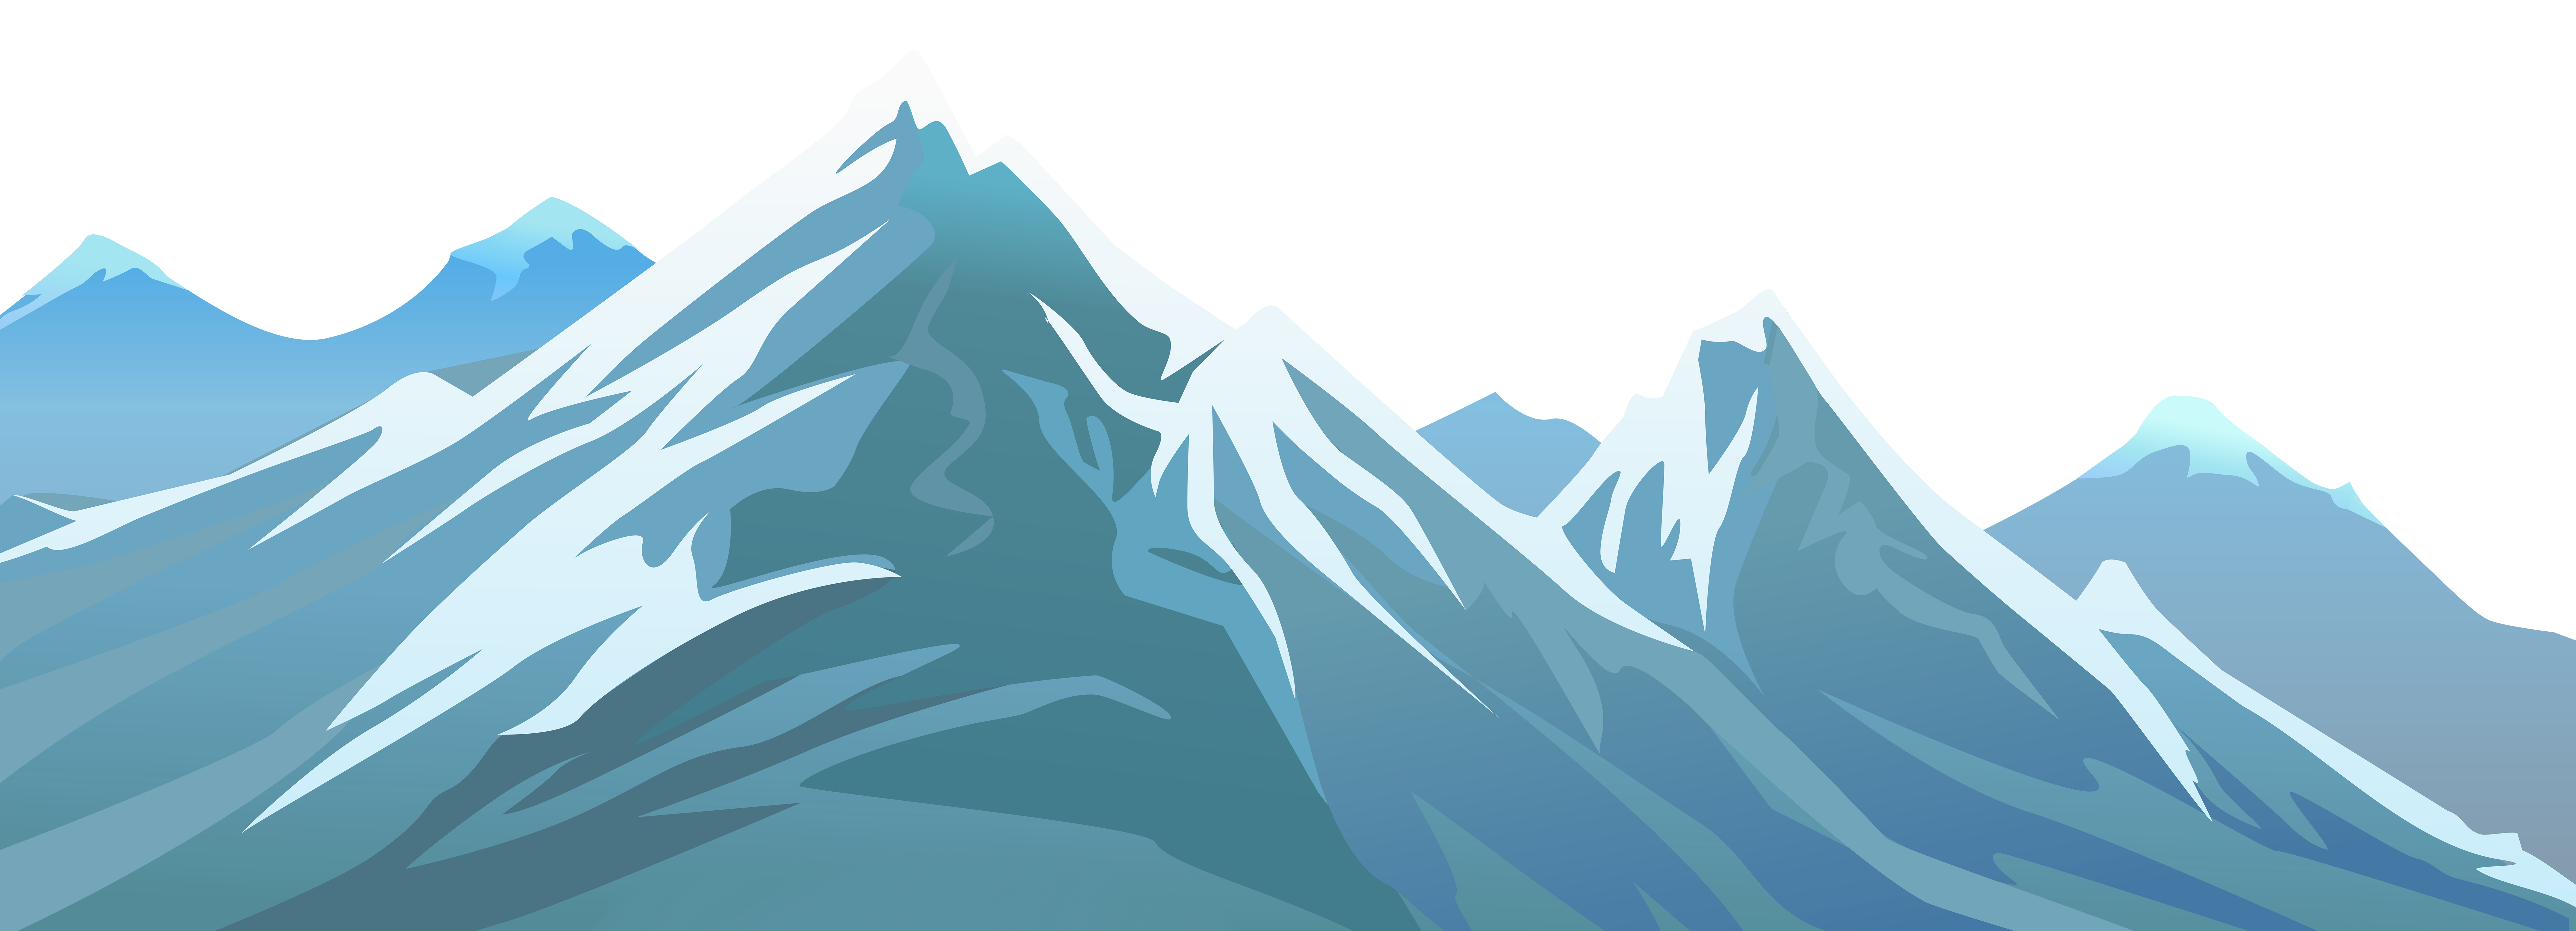 Clipart snow backdrop. Snowy mountain transparent png